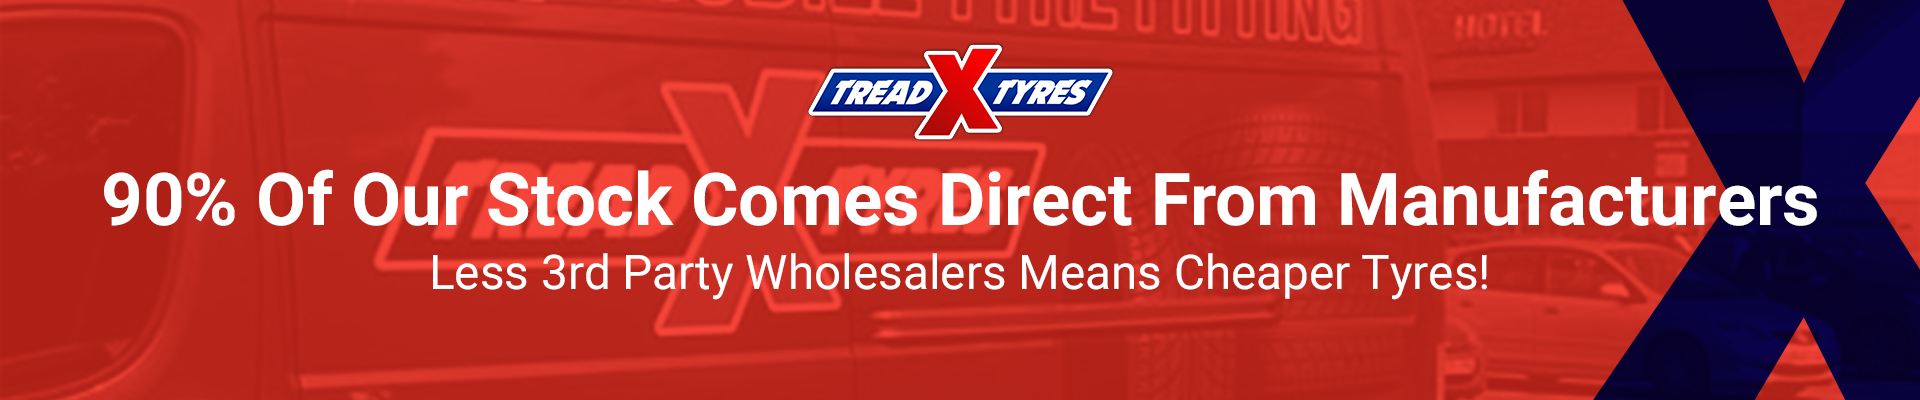 Treadxtyres 2nd Section Banner